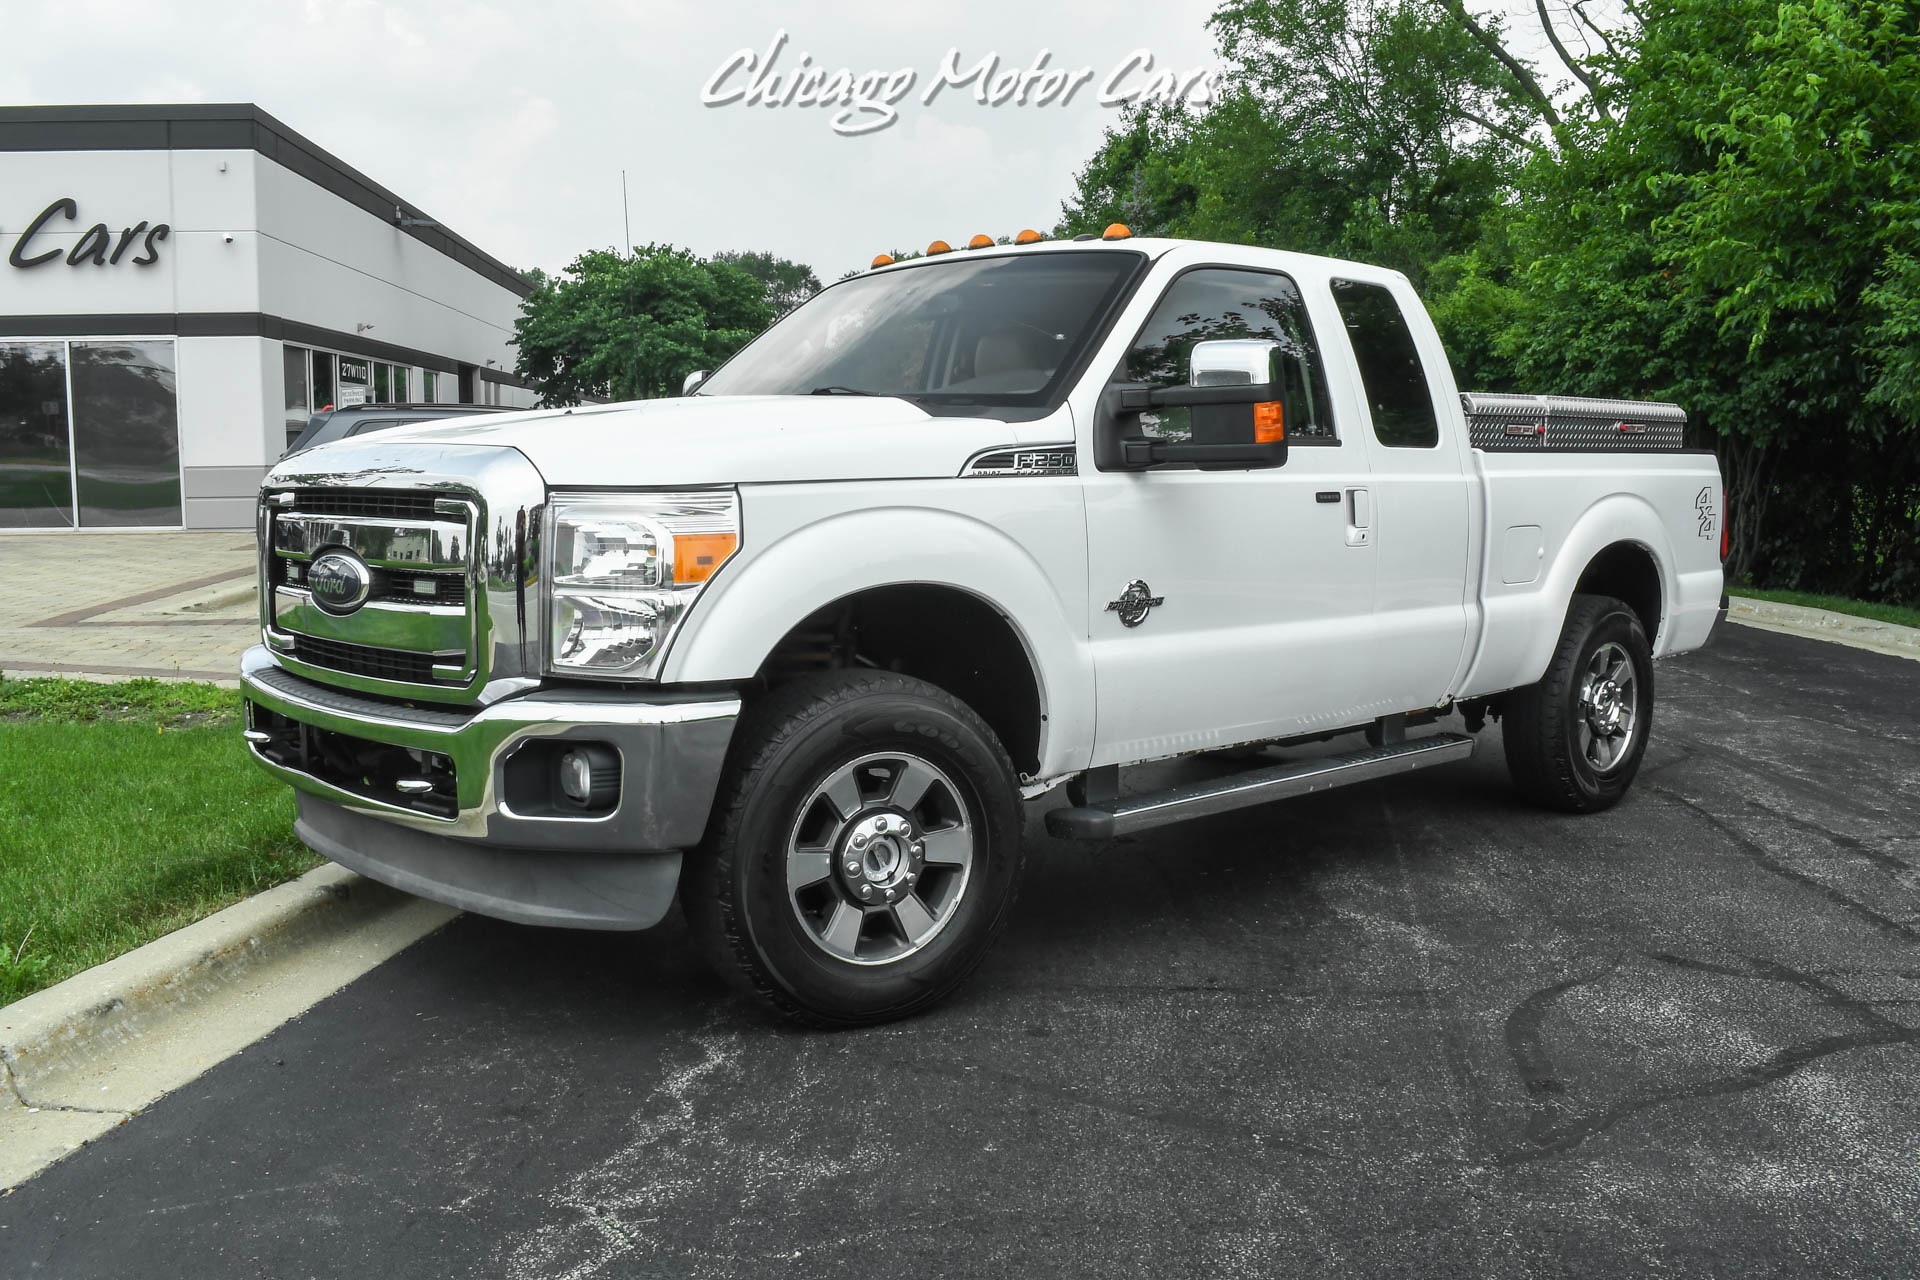 Used 2011 Ford F-250 Super Duty Lariat 4x4-POWERSTROKE DIESEL-ONE  OWNER-EXTREMELY CLEAN! For Sale ($15,800) | Chicago Motor Cars Stock #18467